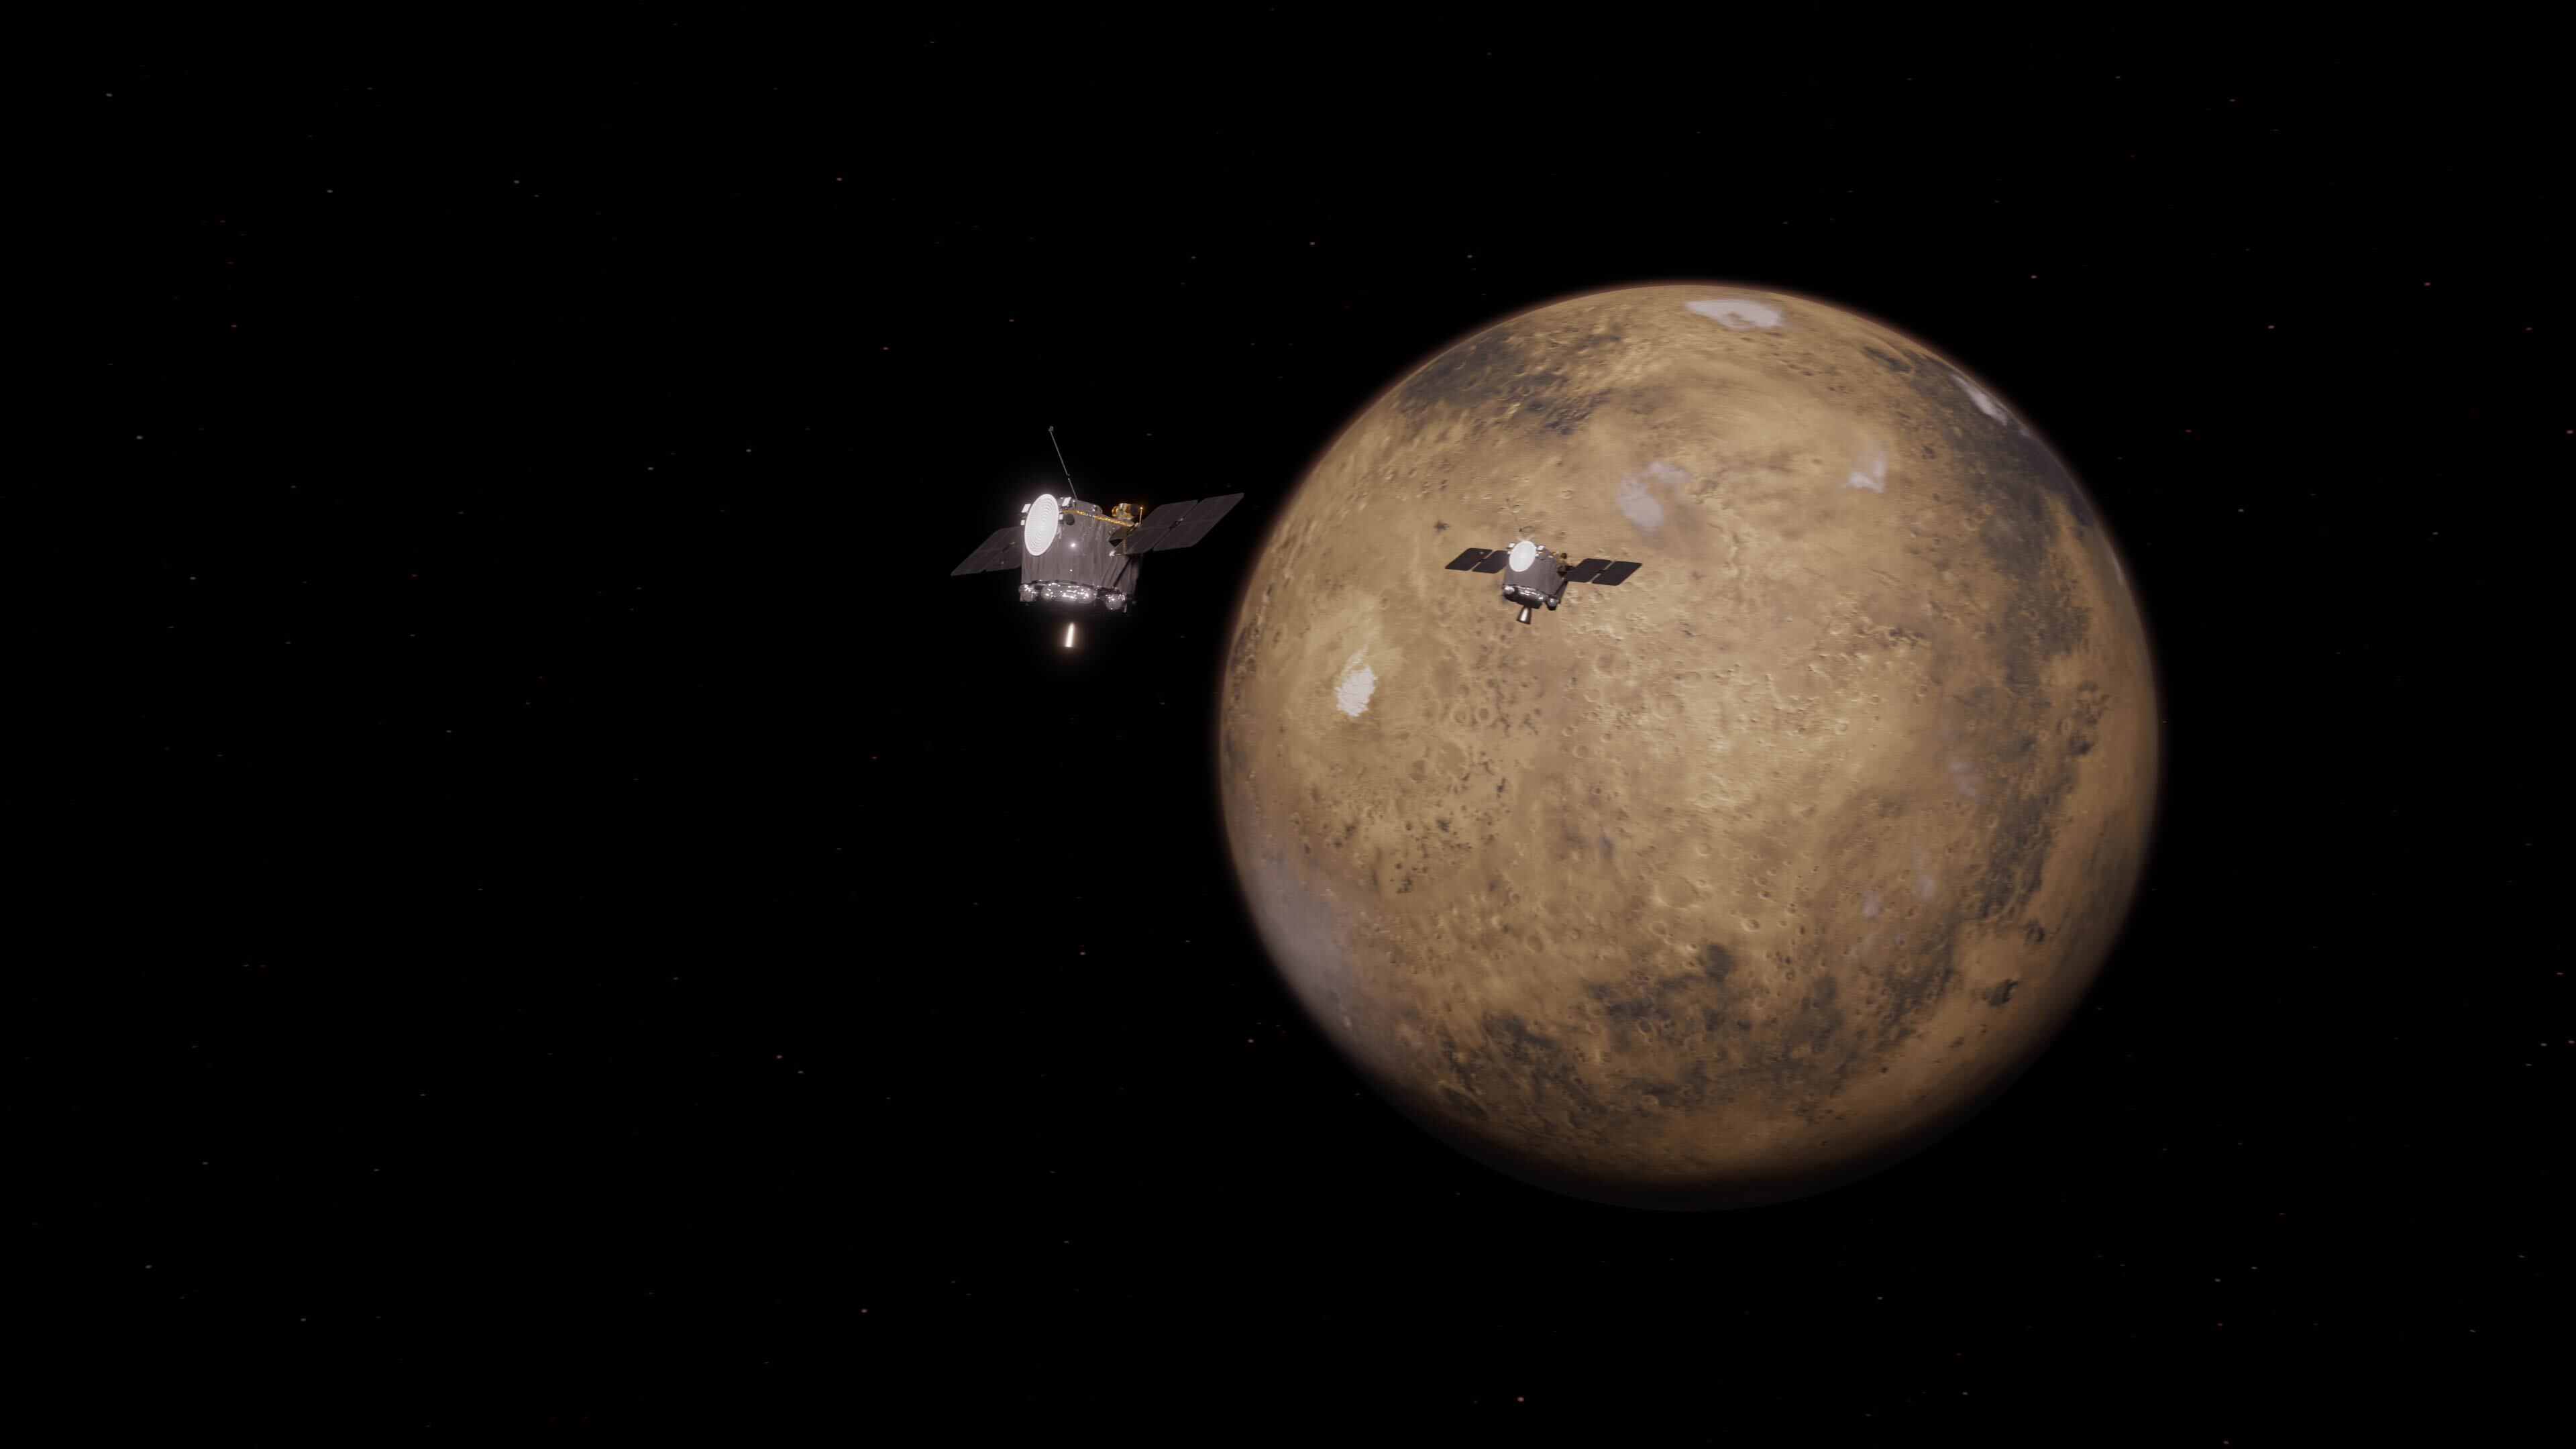 An animation showing Mars against a black background. Two spacecraft – like short gray cyclinders with flat panels on the right and left – orbit the planet.